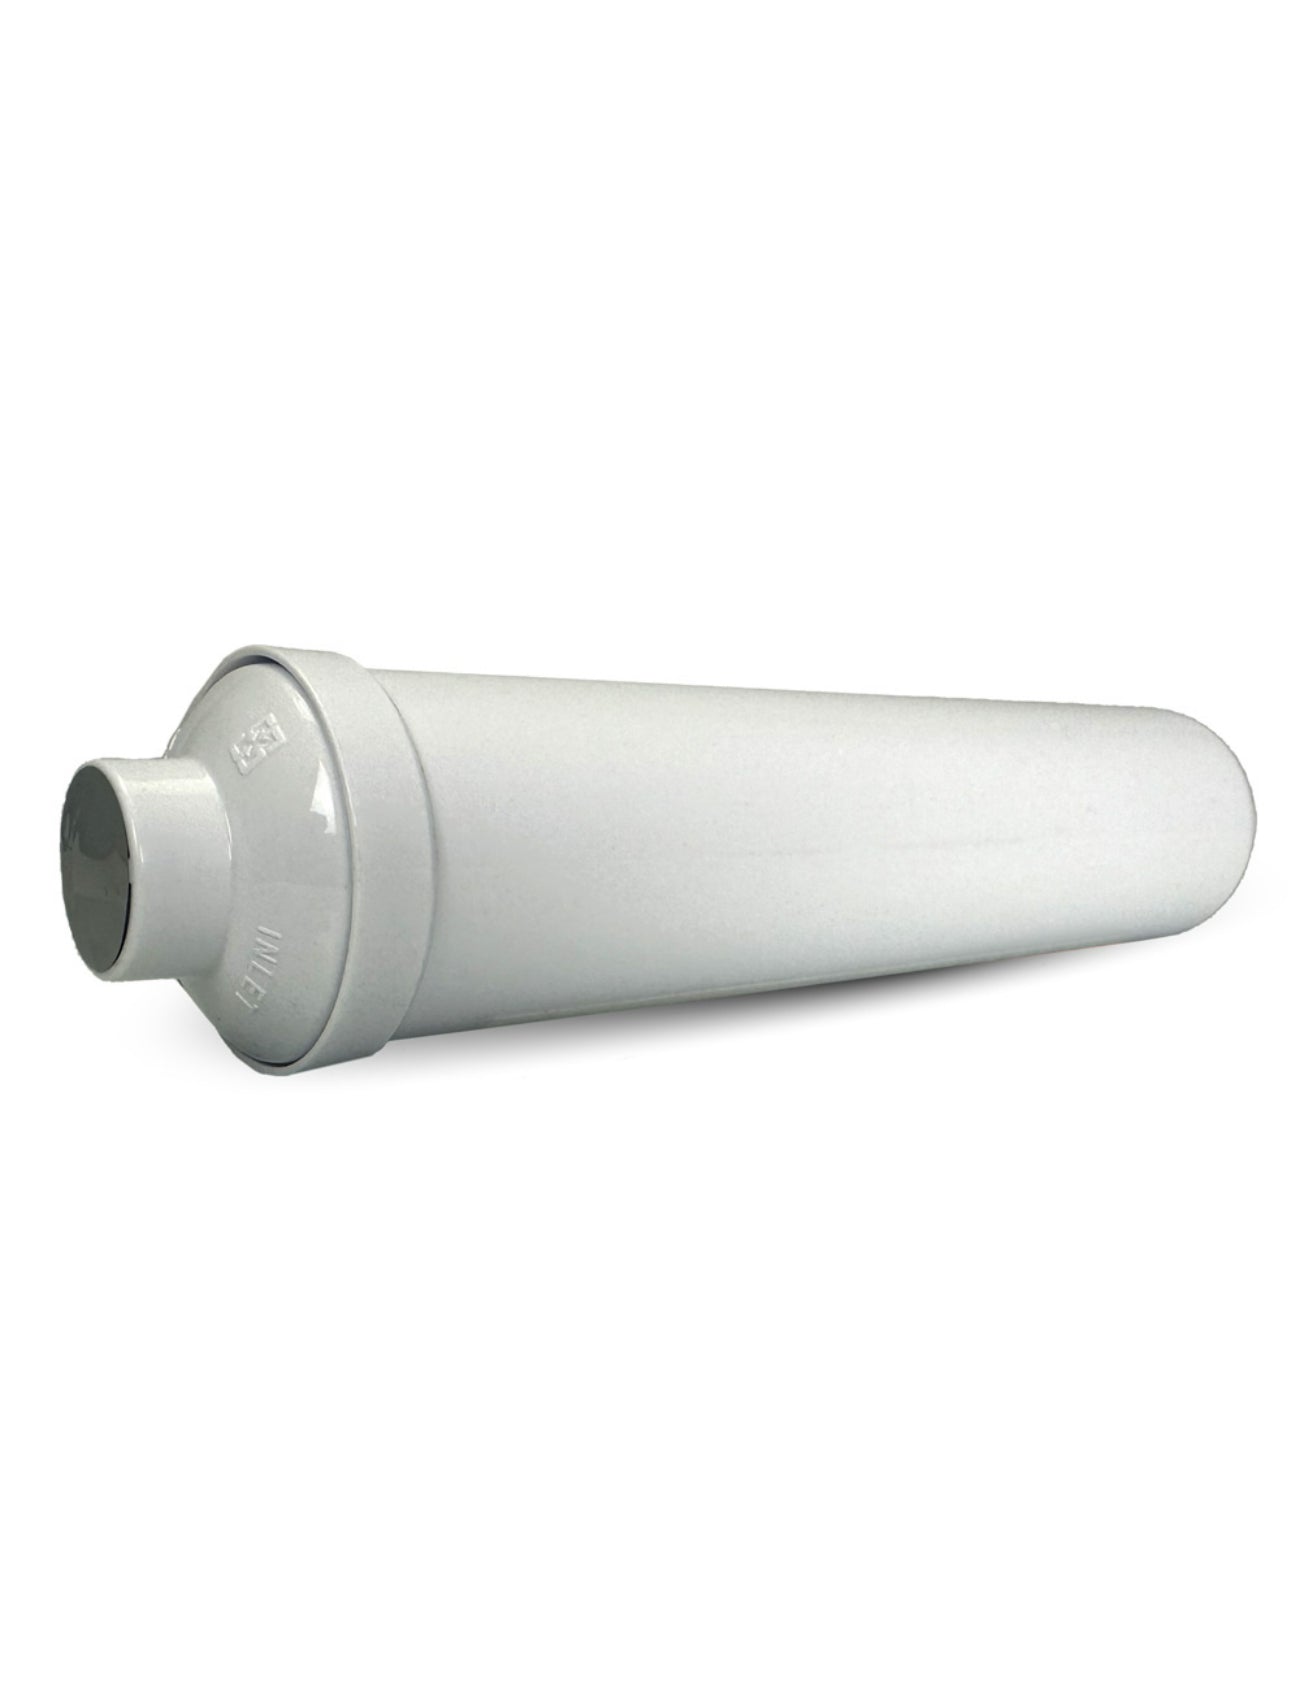 WATER FILTER NSF42 INCL HOSE FITTINGS